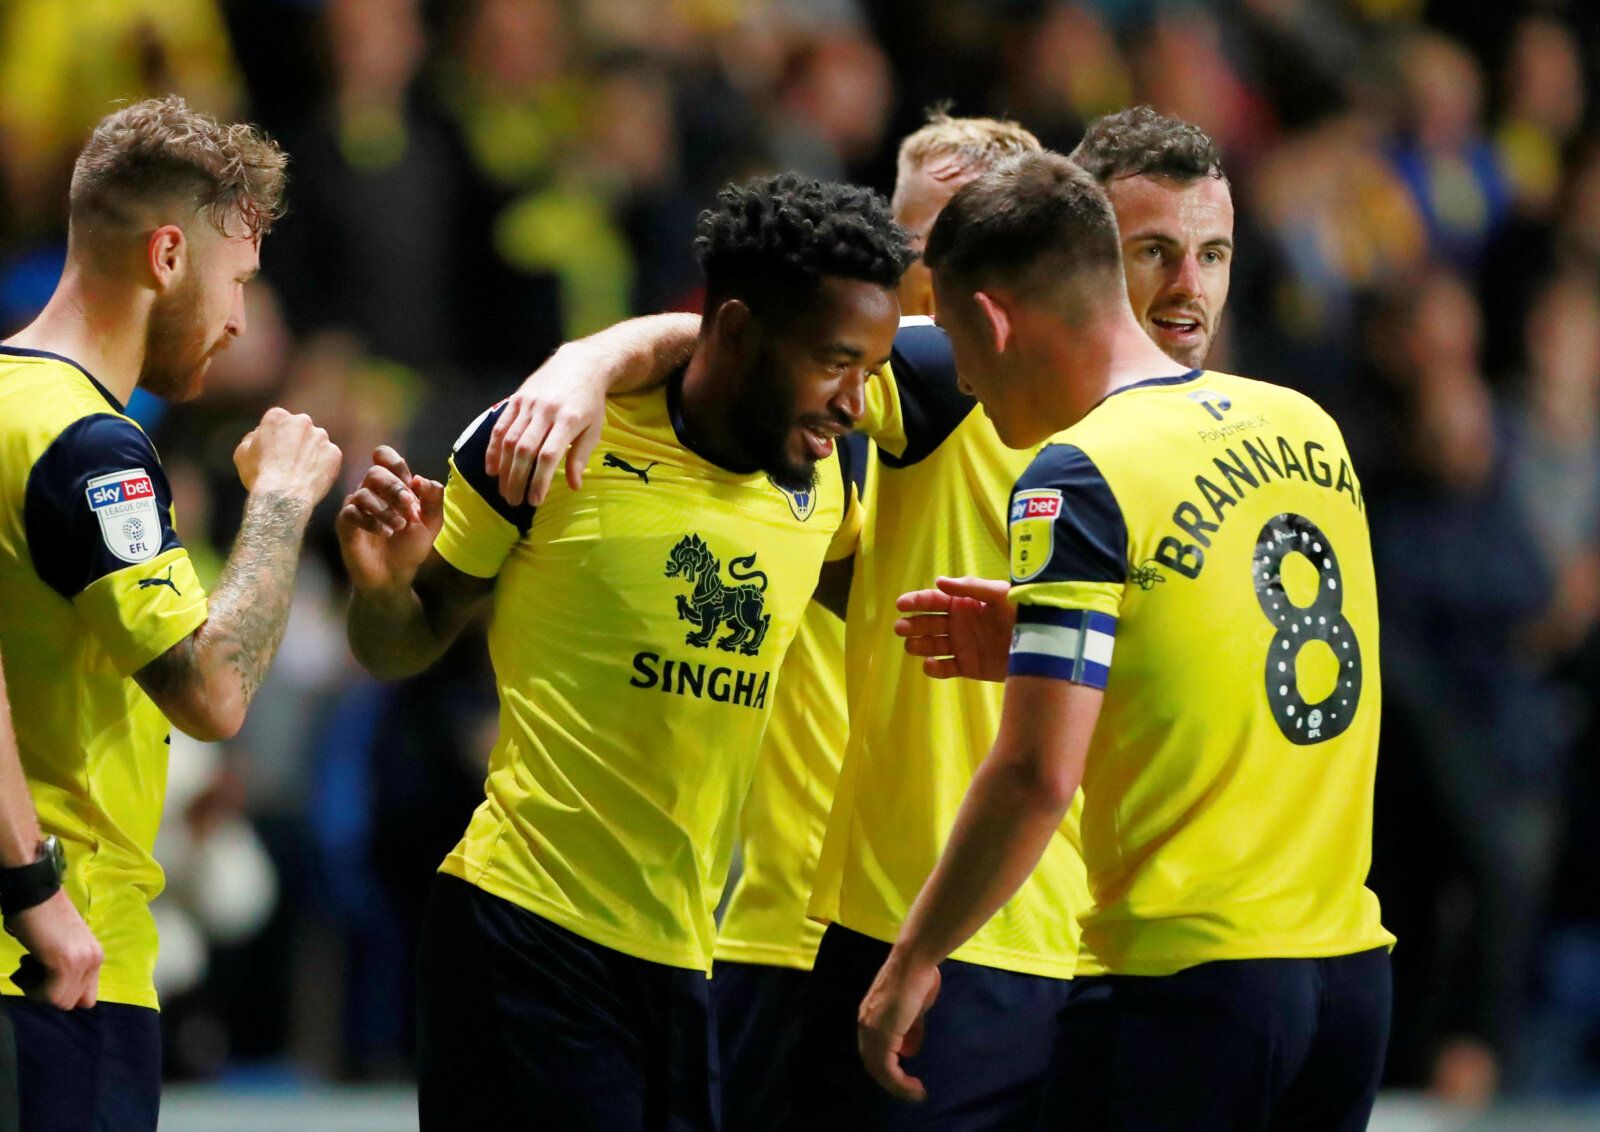 Soccer Football - Carabao Cup - Third Round - Oxford United v West Ham United - Kassam Stadium, Oxford, Britain - September 25, 2019  Oxford United's Tariqe Fosu celebrates scoring their third goal with teammates  Action Images via Reuters/Andrew Couldridge  EDITORIAL USE ONLY. No use with unauthorized audio, video, data, fixture lists, club/league logos or 